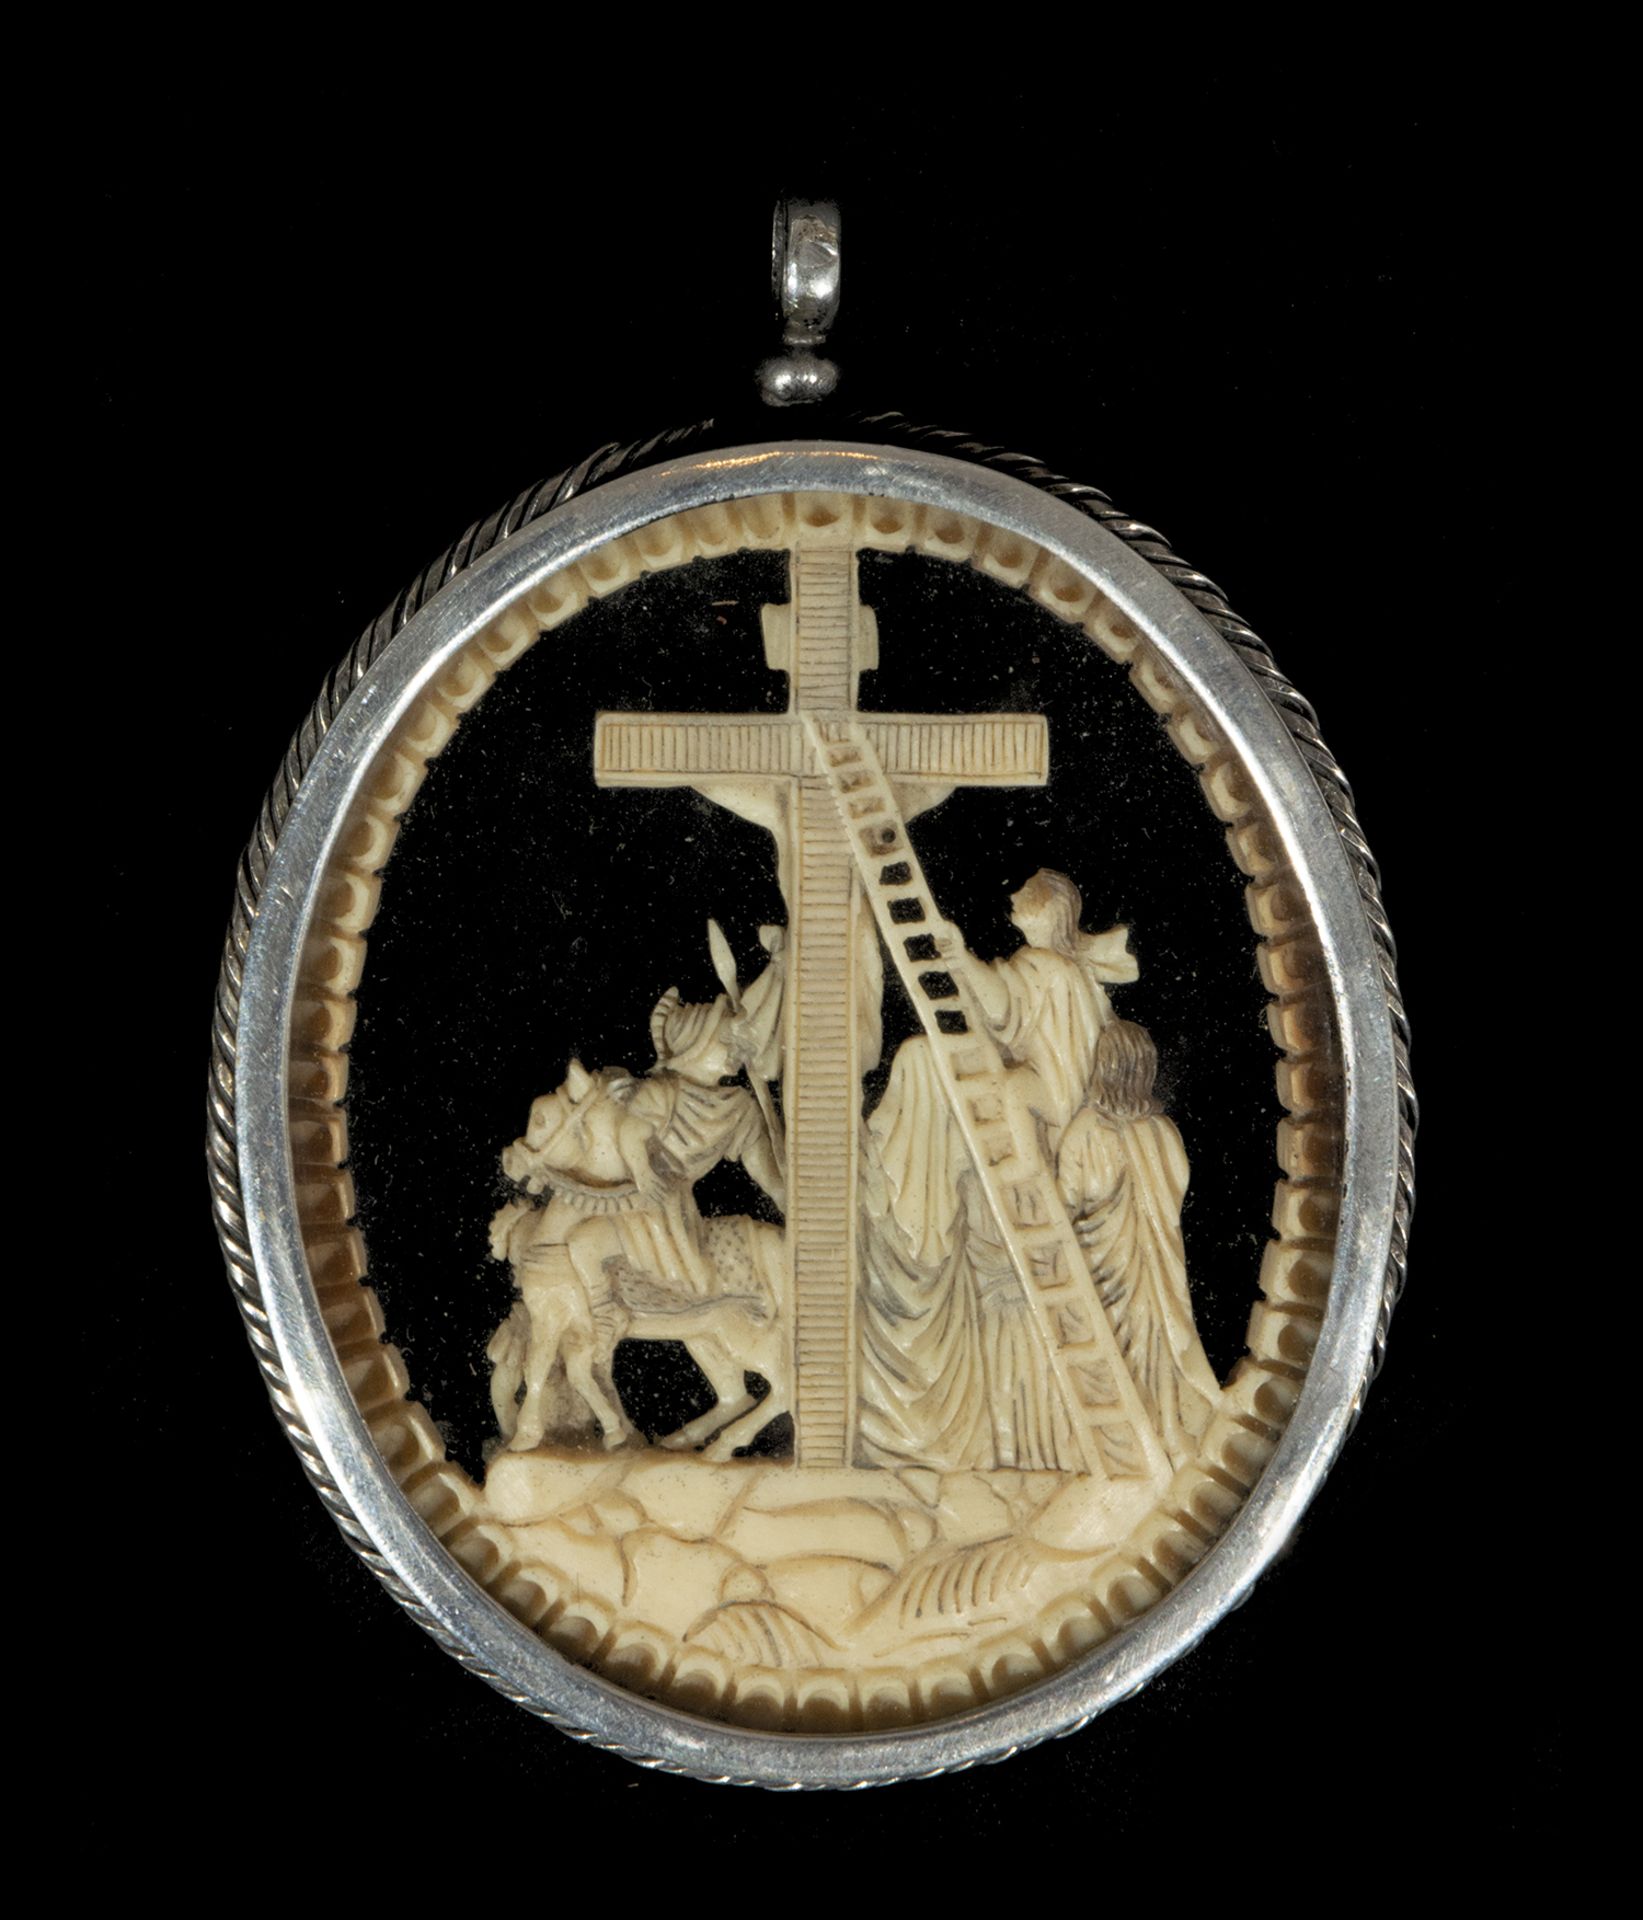 Exceptional Medallion with Calvary in ivory, Milanese or Florentine Renaissance Italian work from th - Image 2 of 2